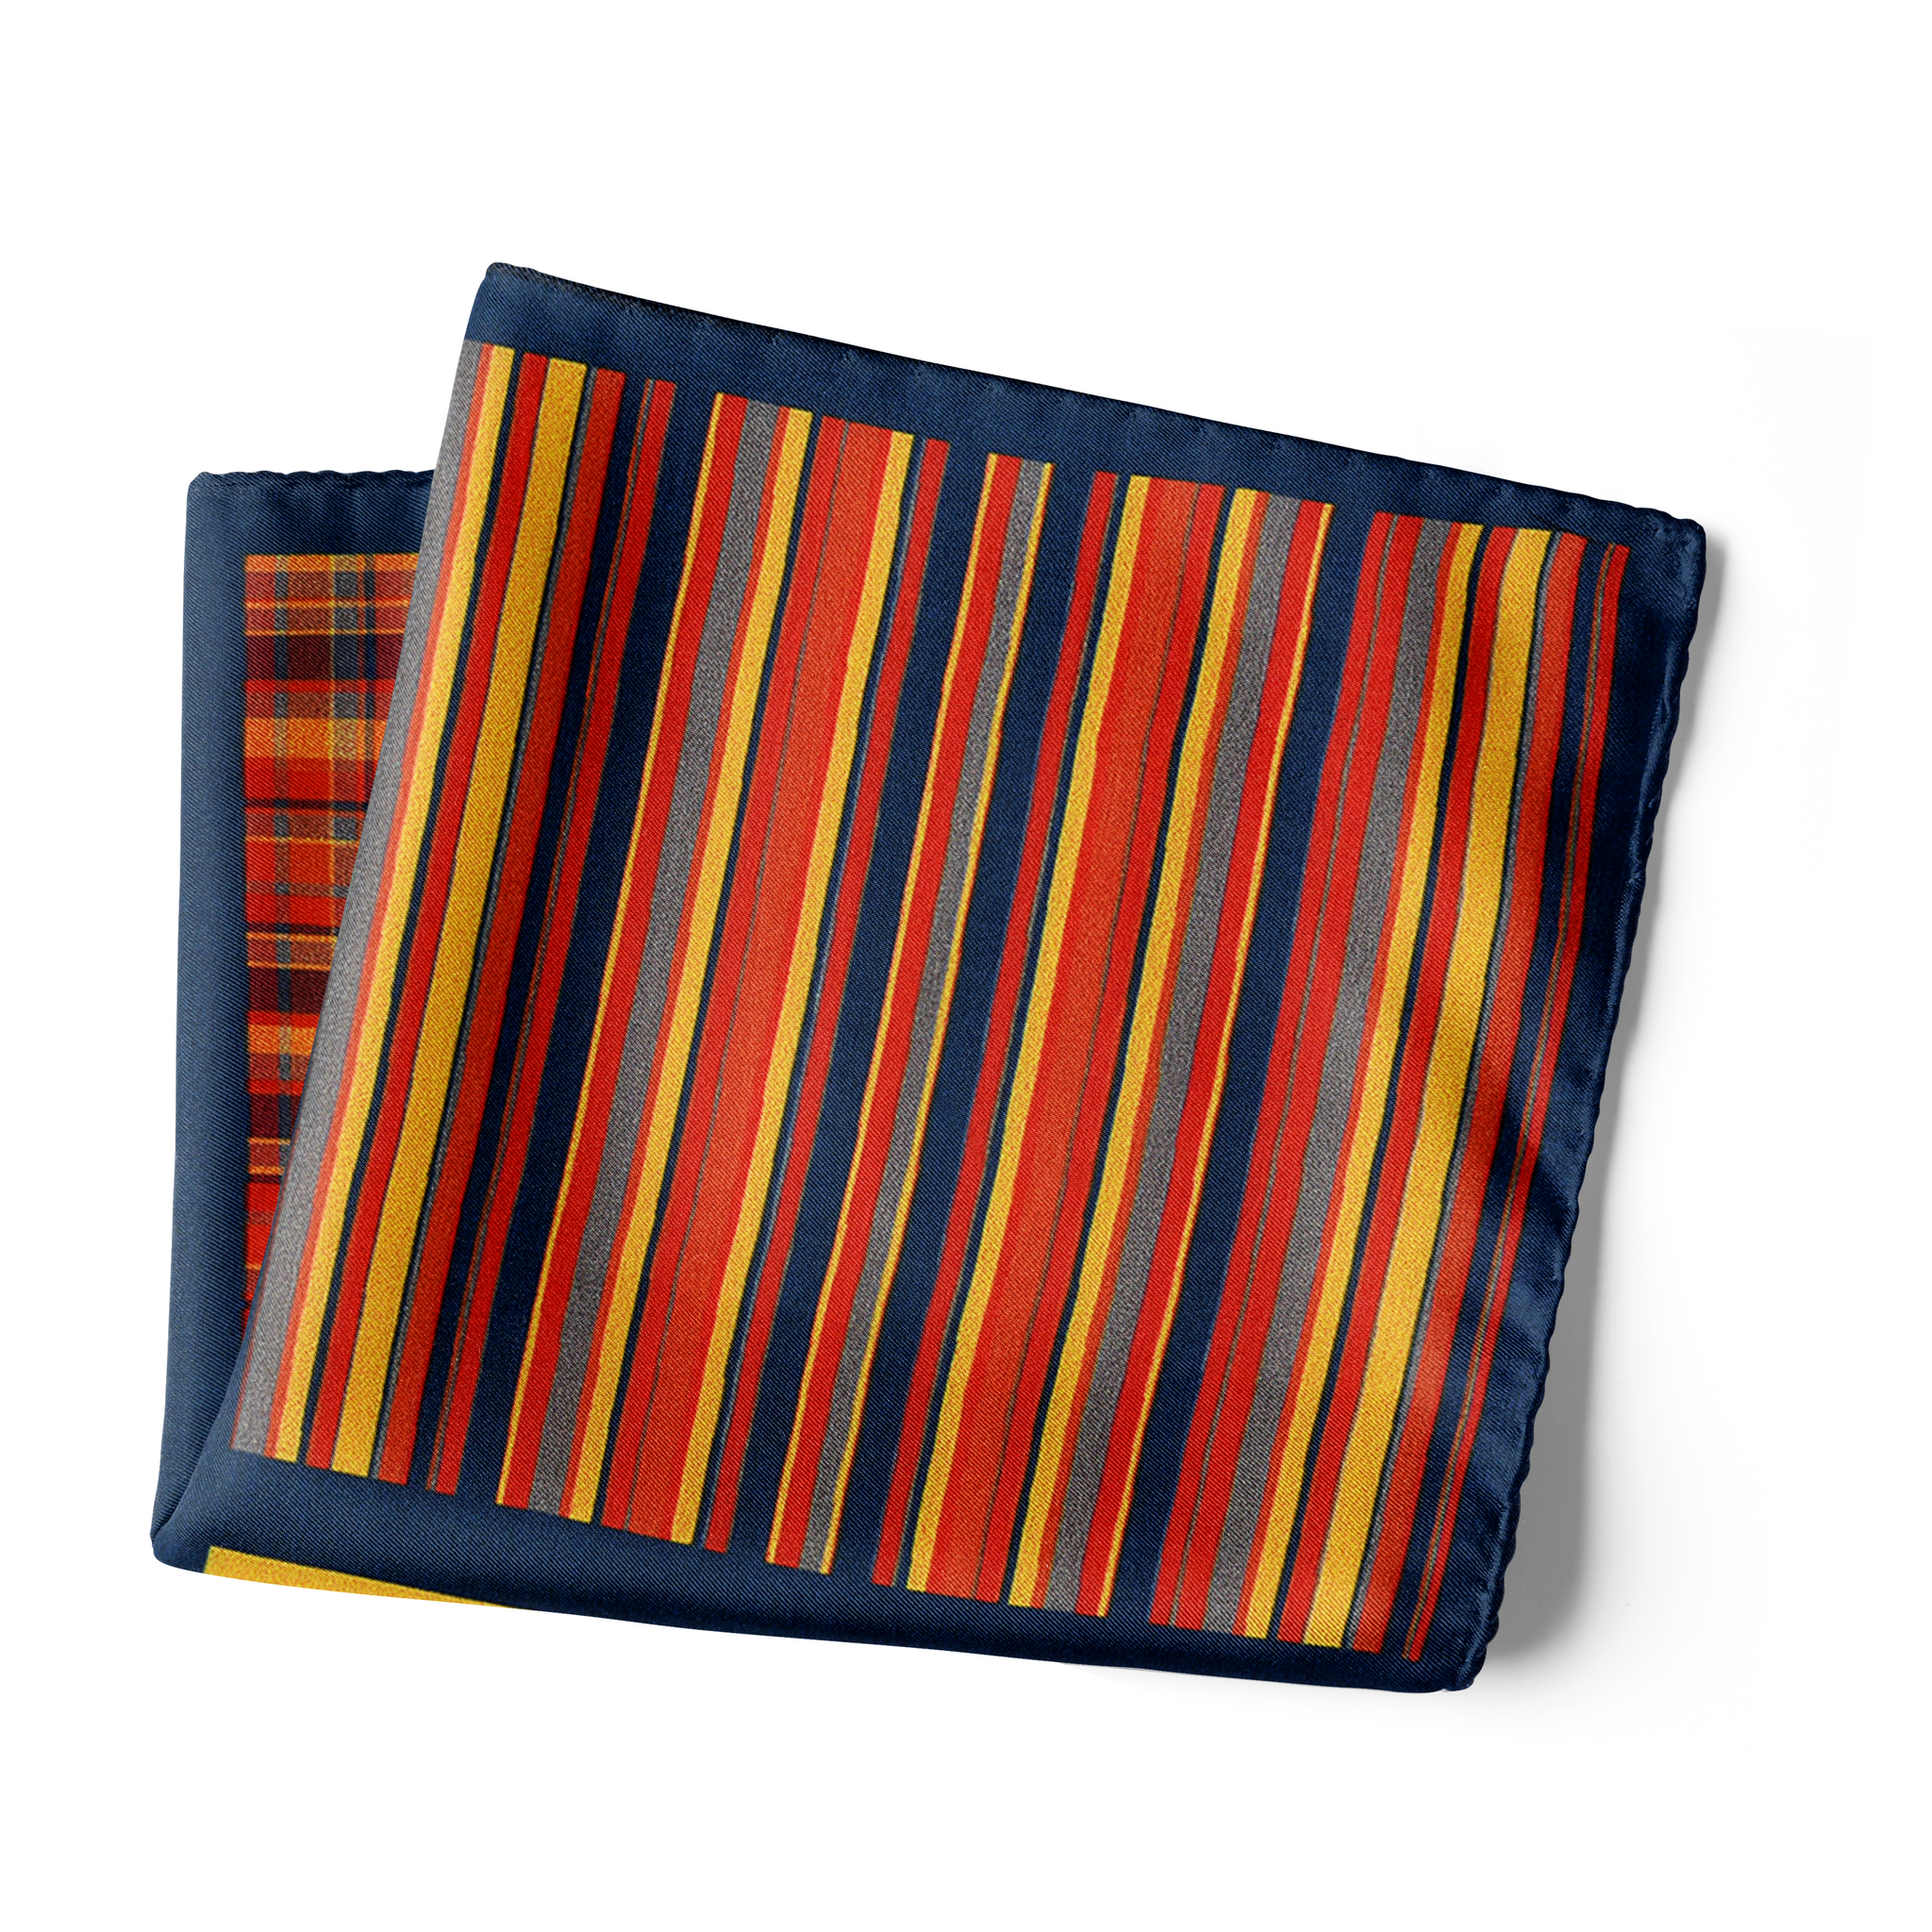 Chokore Four-in-One Red & Yellow Silk Pocket Square from the Plaids Line